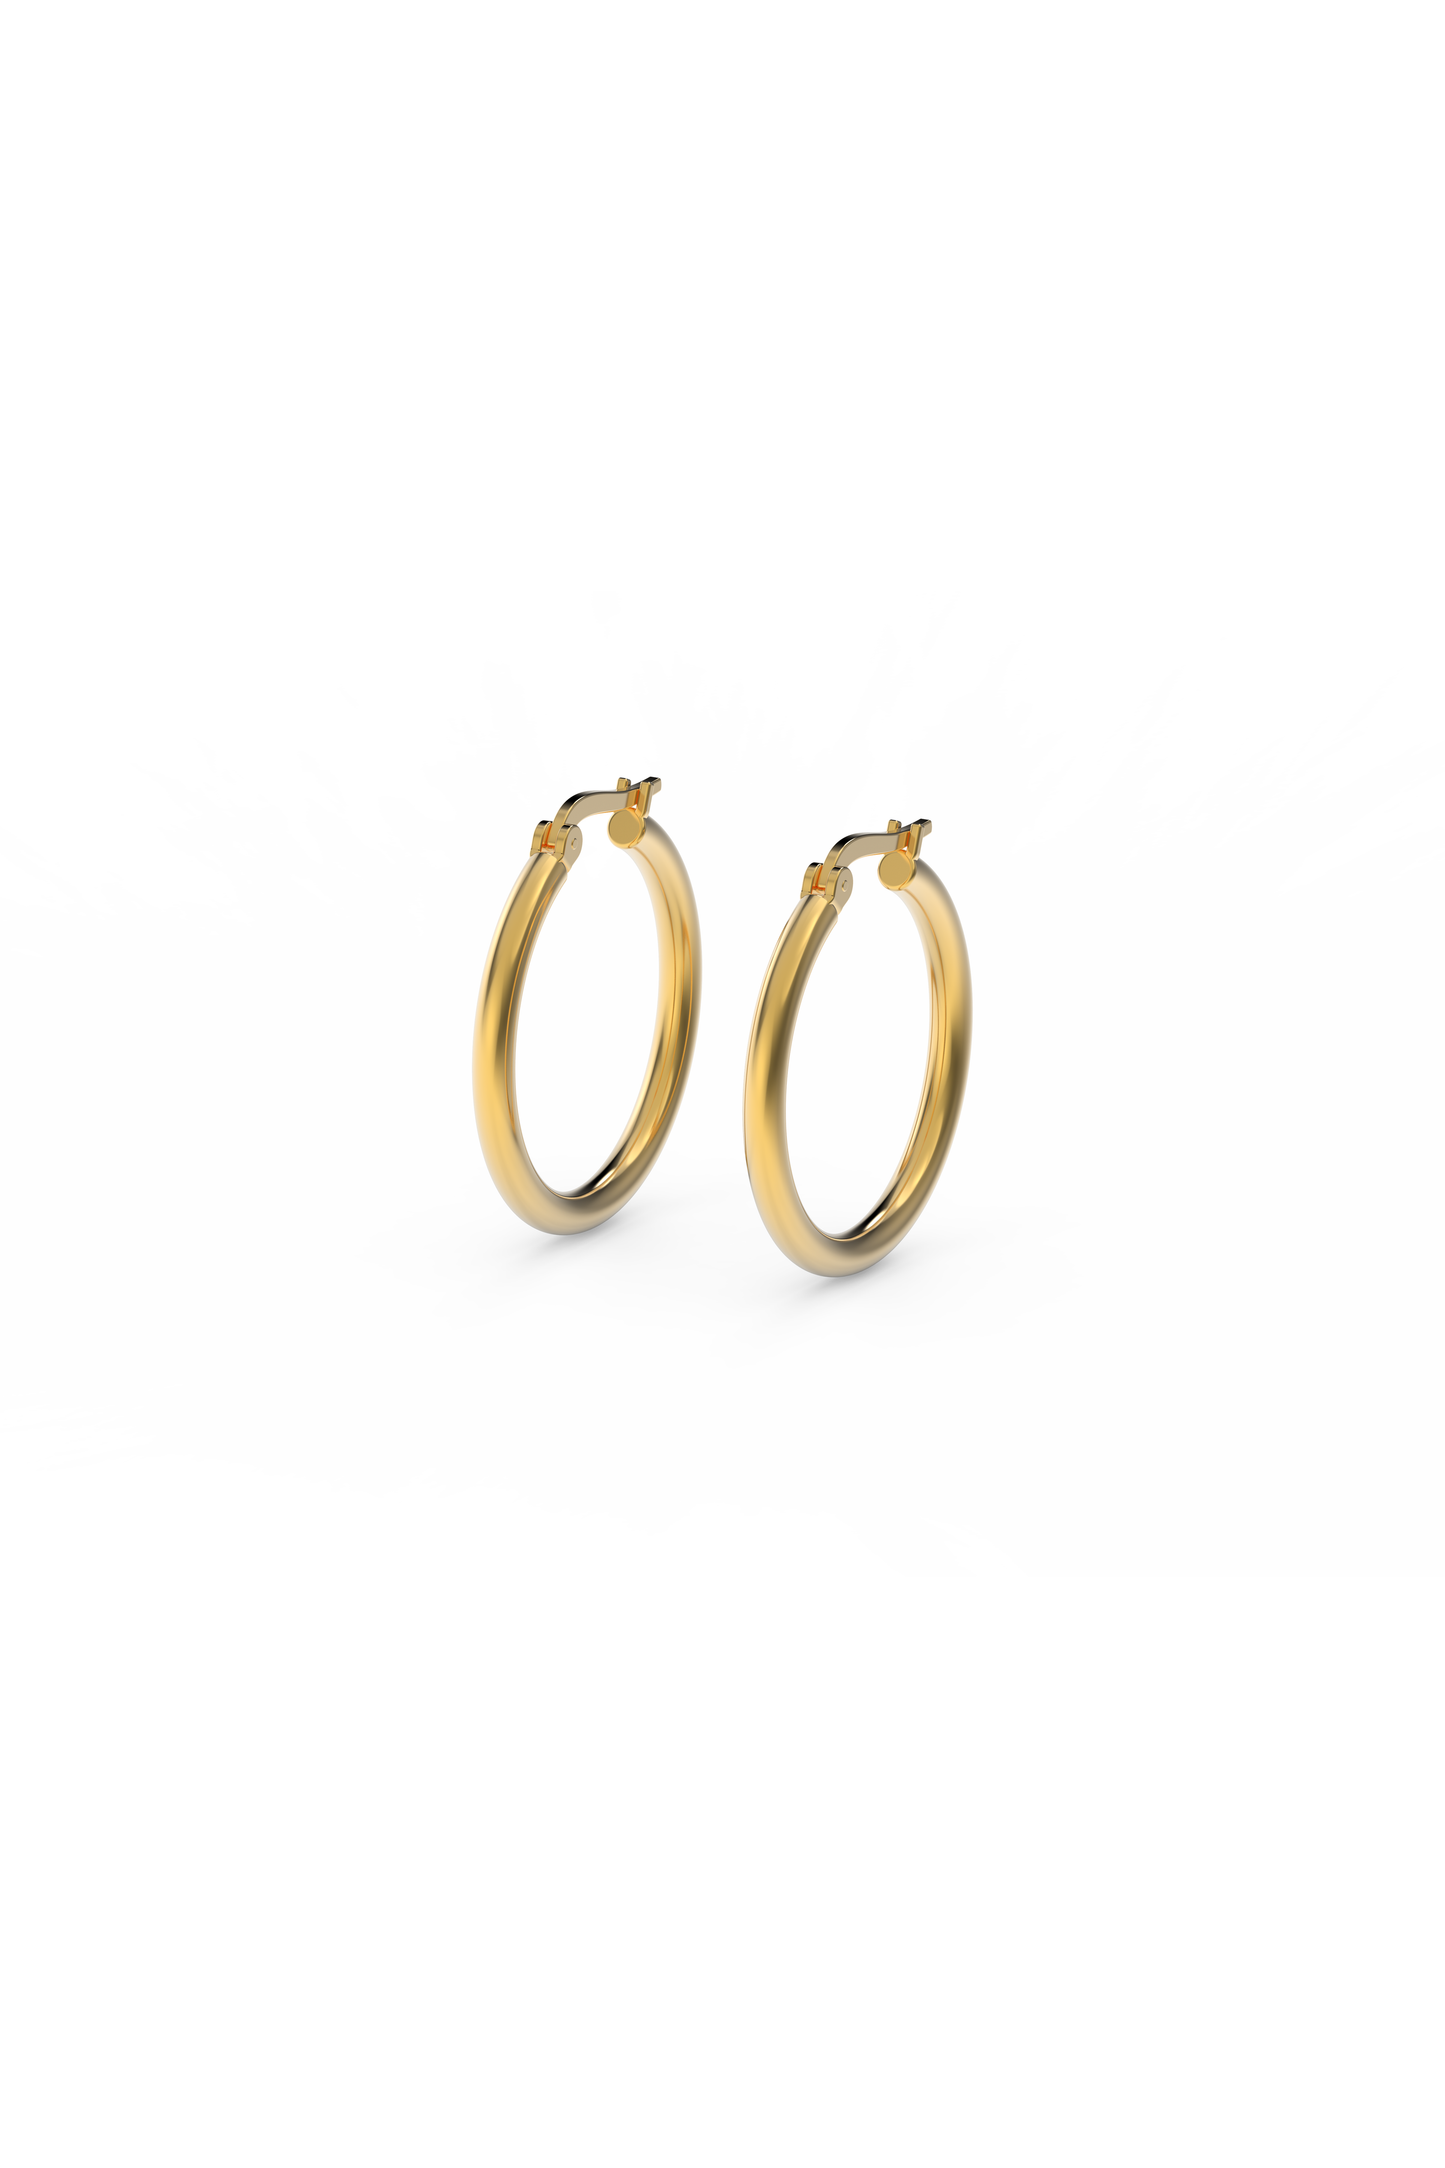 9ct Yellow gold hoops